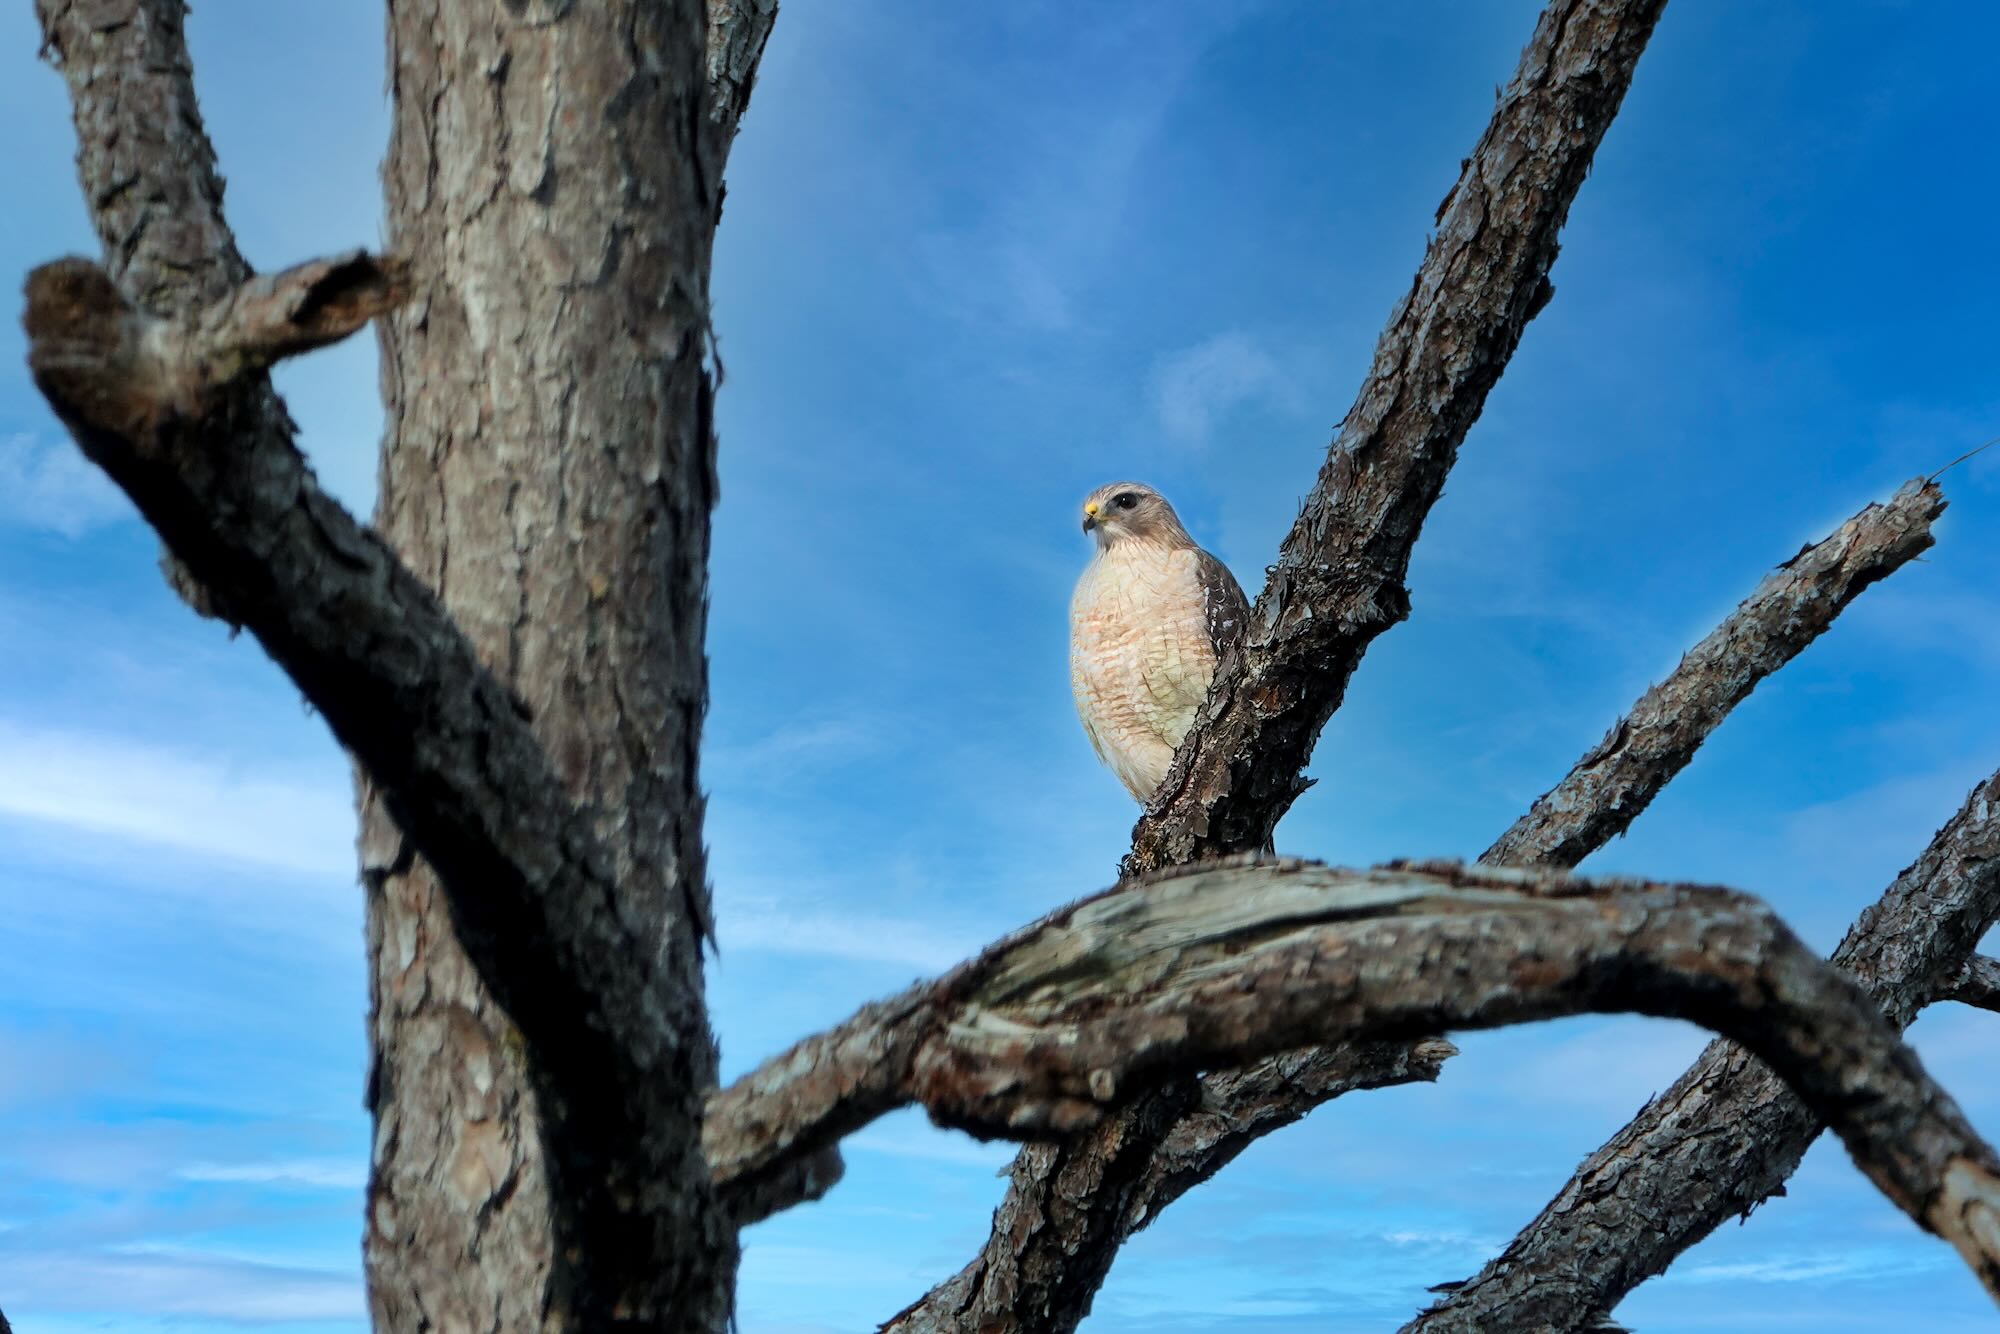 Red Shouldered Hawk, Photo by Dave Cottrill